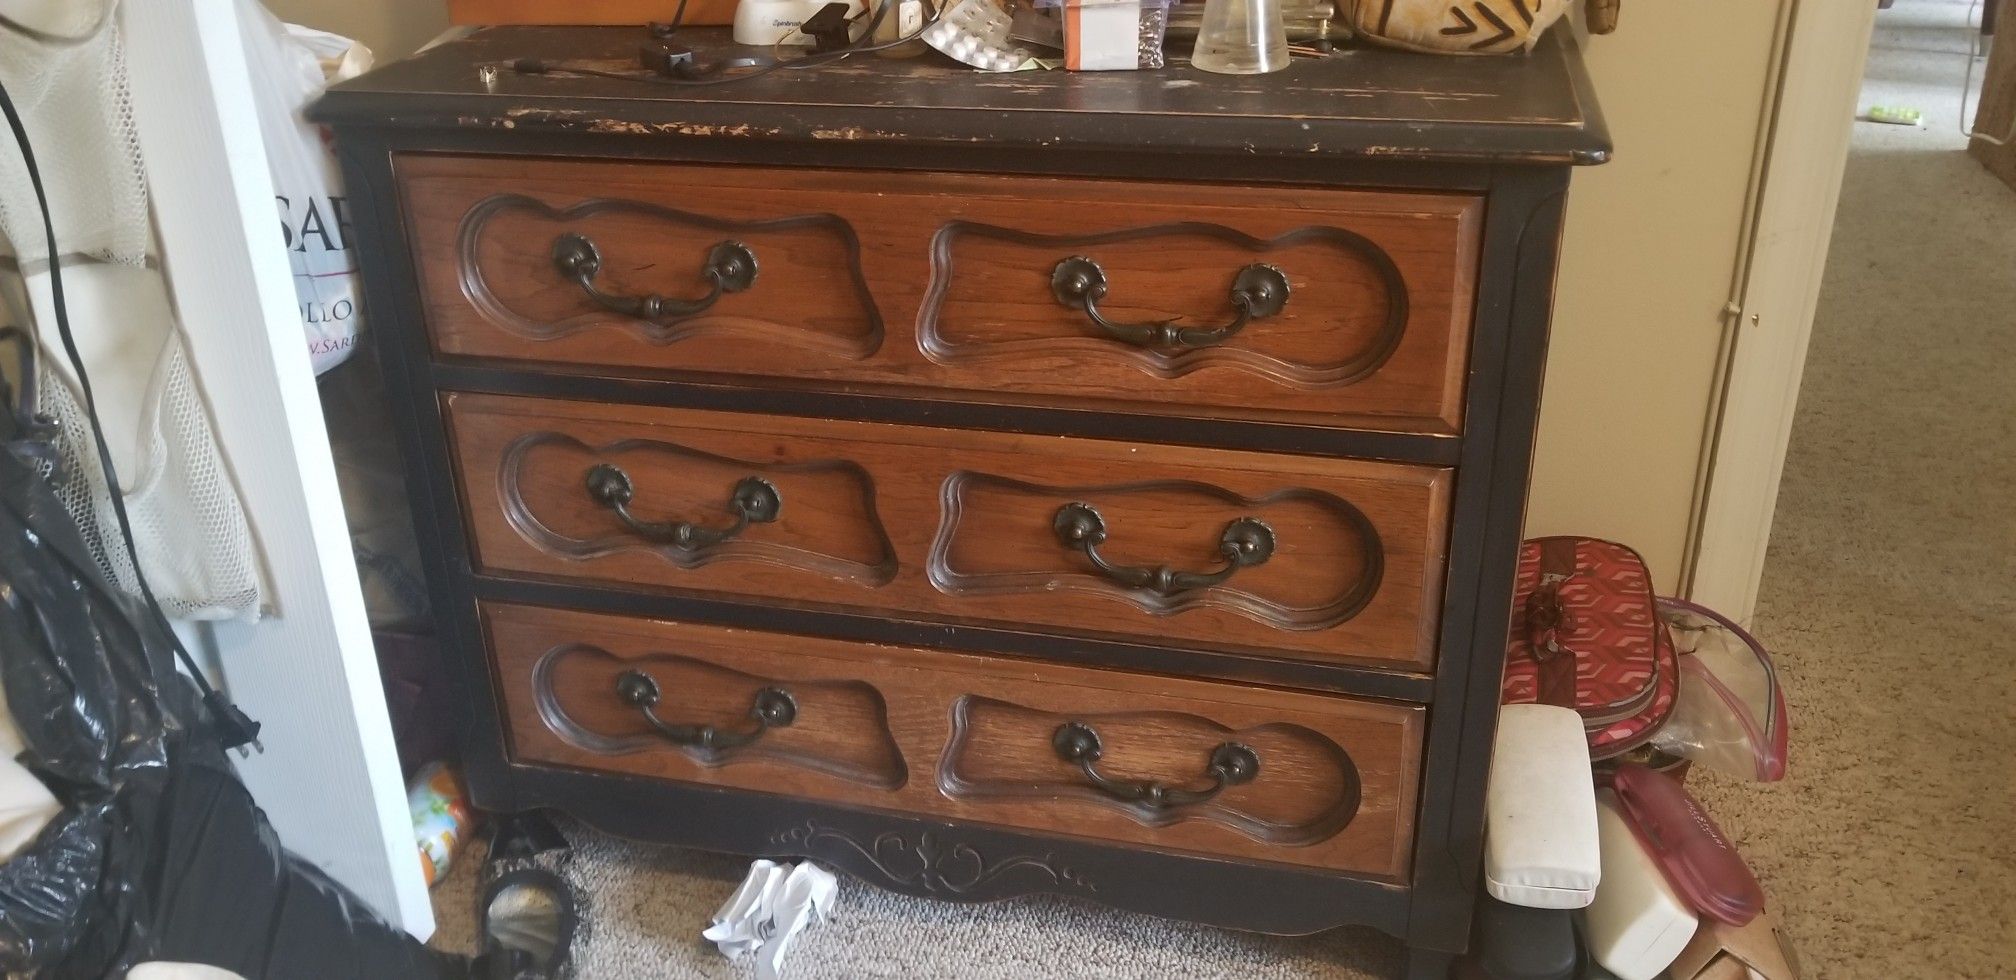 AVAILABLE UNTIL SUNDAY 6/17: $30 Obo Rustic Bedroom Dresser, Chic Wooden & Black, Gothic looking, 3 drawer